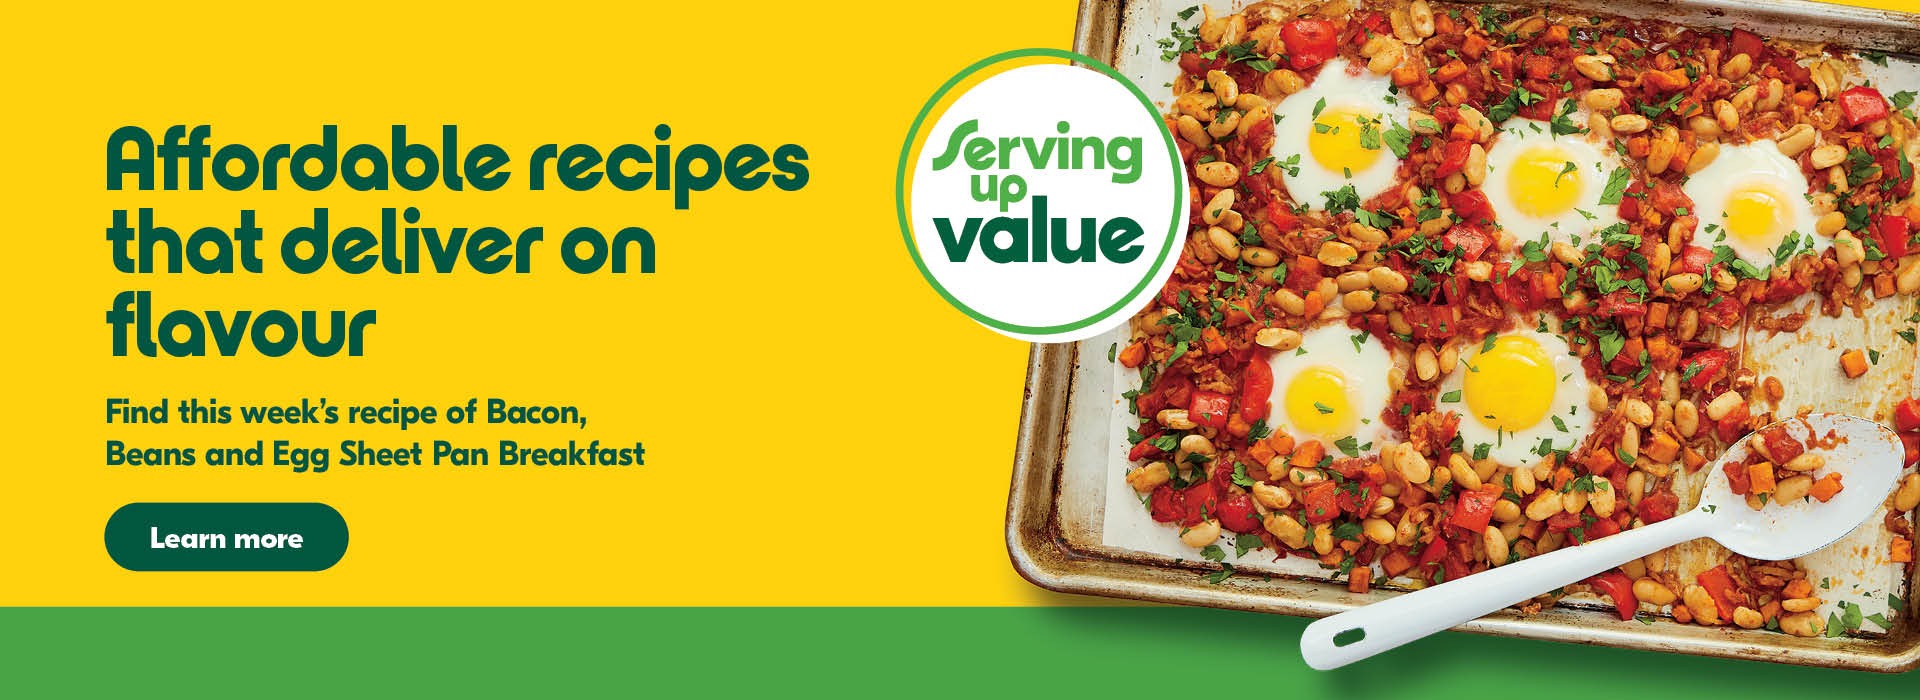 Affordable recipes that deliver on flavour; this weeks recipe is Bacon, Beans and Egg Sheet Pan Breakfast